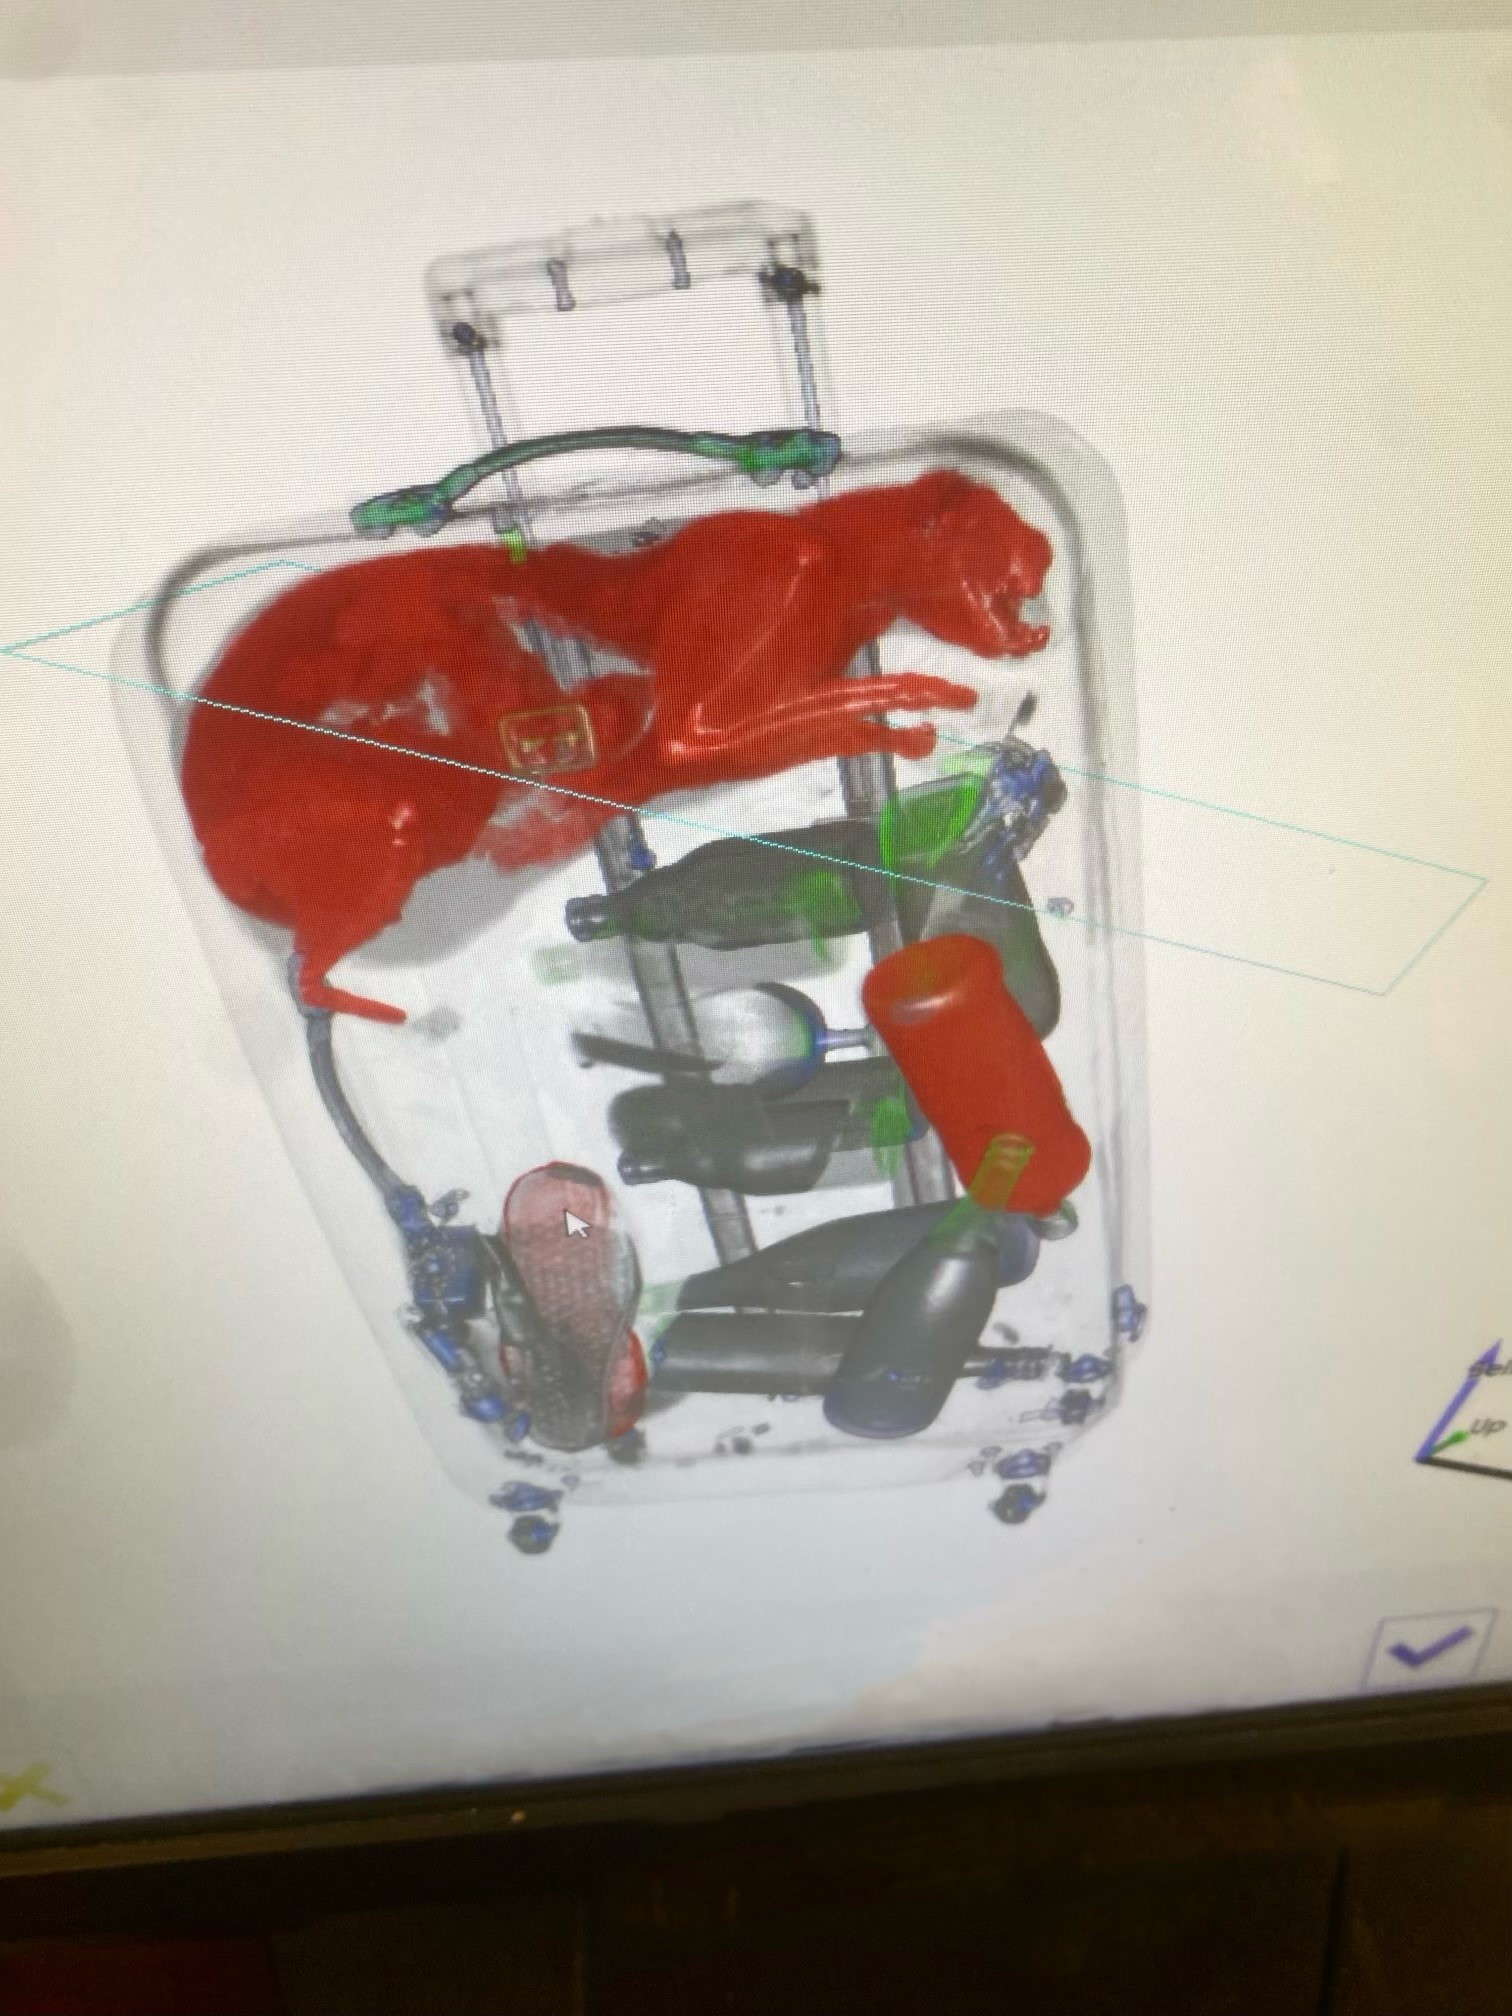 X-ray image of cat in a traveler's checked luggage